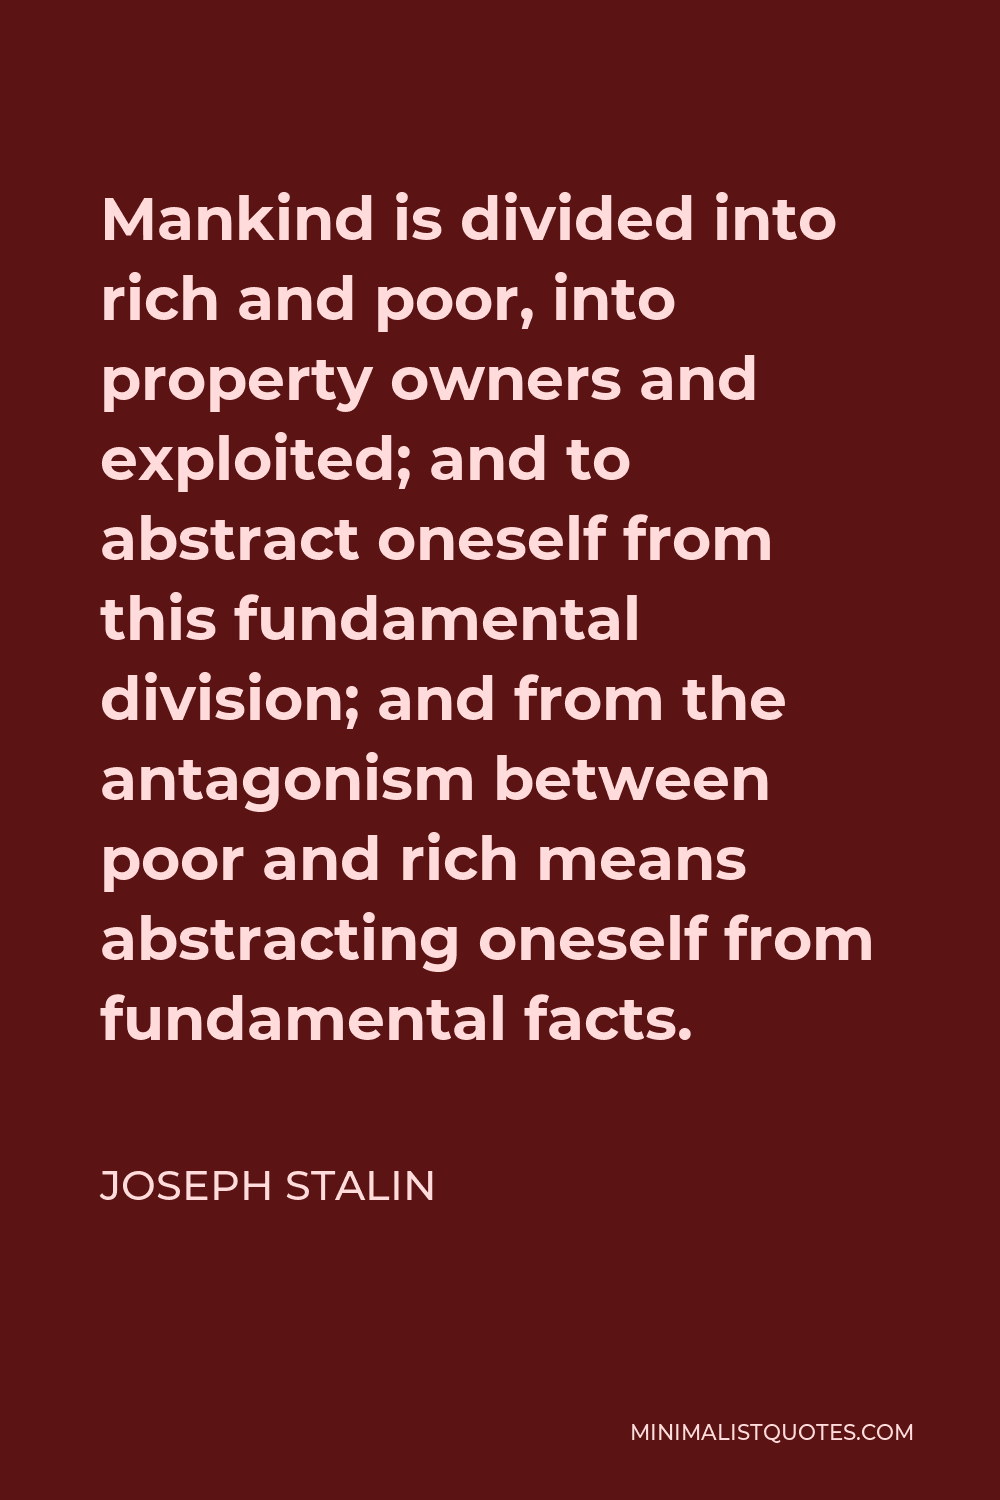 Joseph Stalin Quote - Mankind is divided into rich and poor, into property owners and exploited; and to abstract oneself from this fundamental division; and from the antagonism between poor and rich means abstracting oneself from fundamental facts.